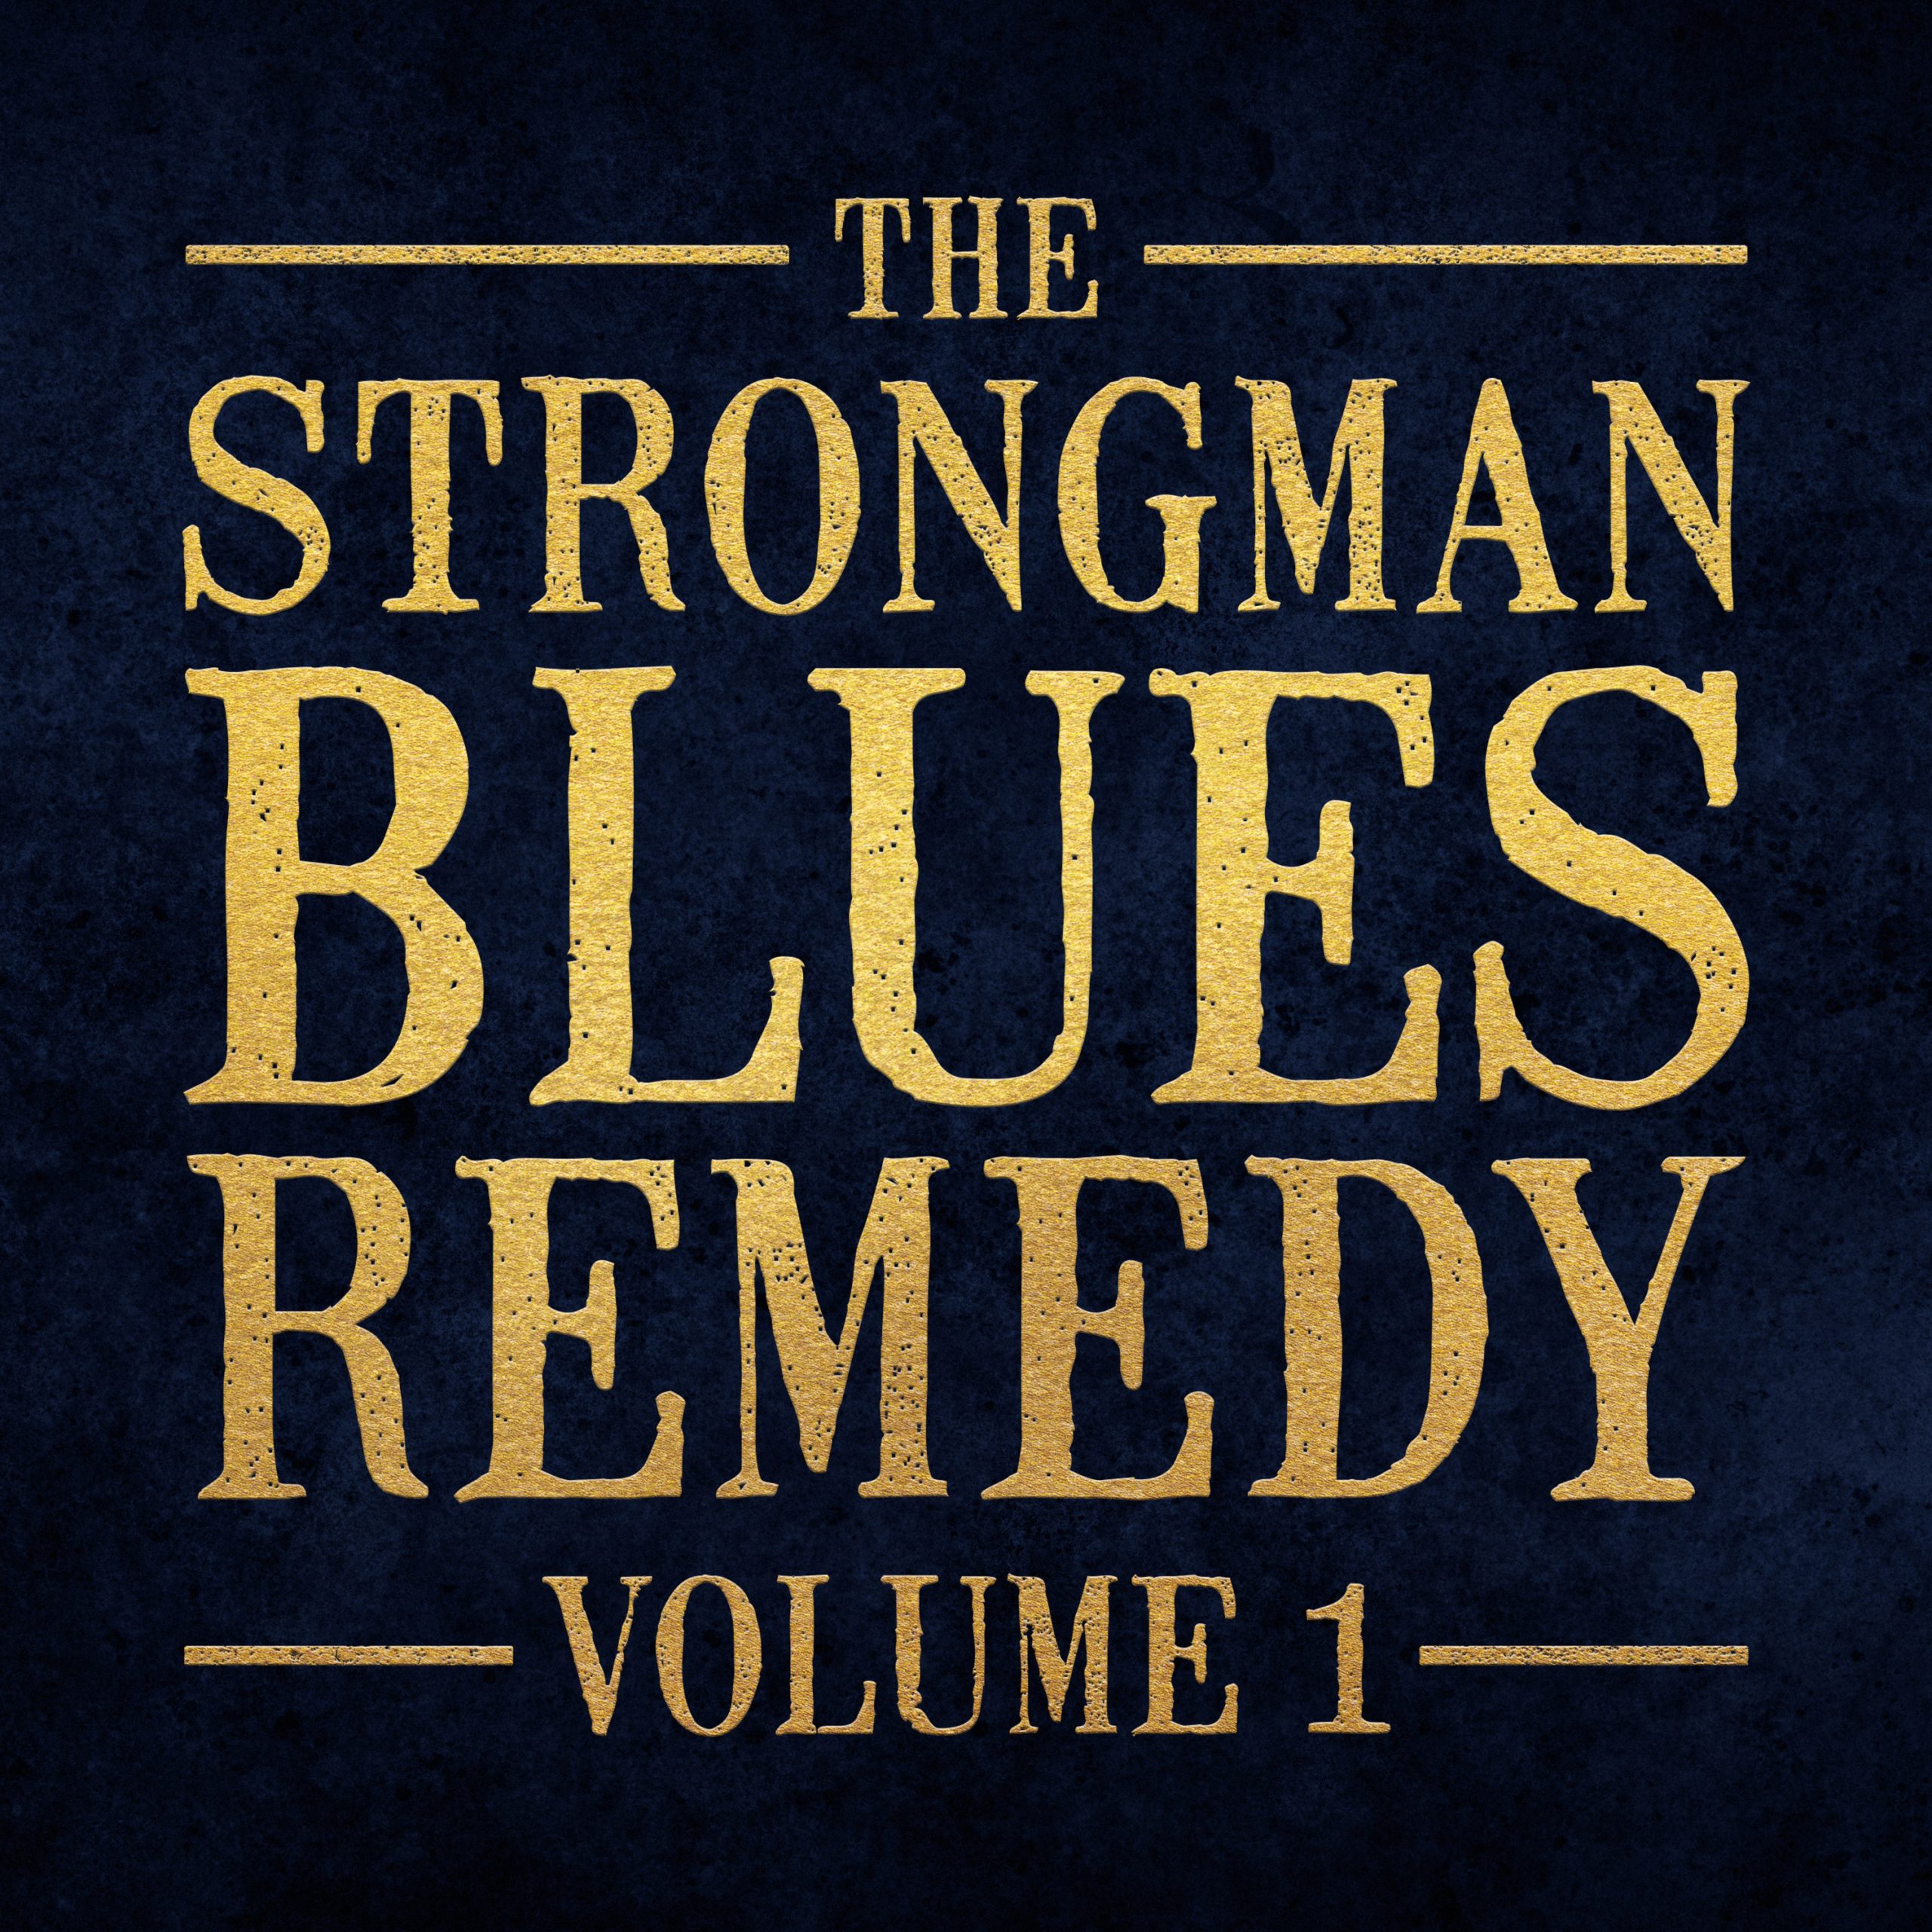 New blues musical collective, The Strongman Blues Remedy